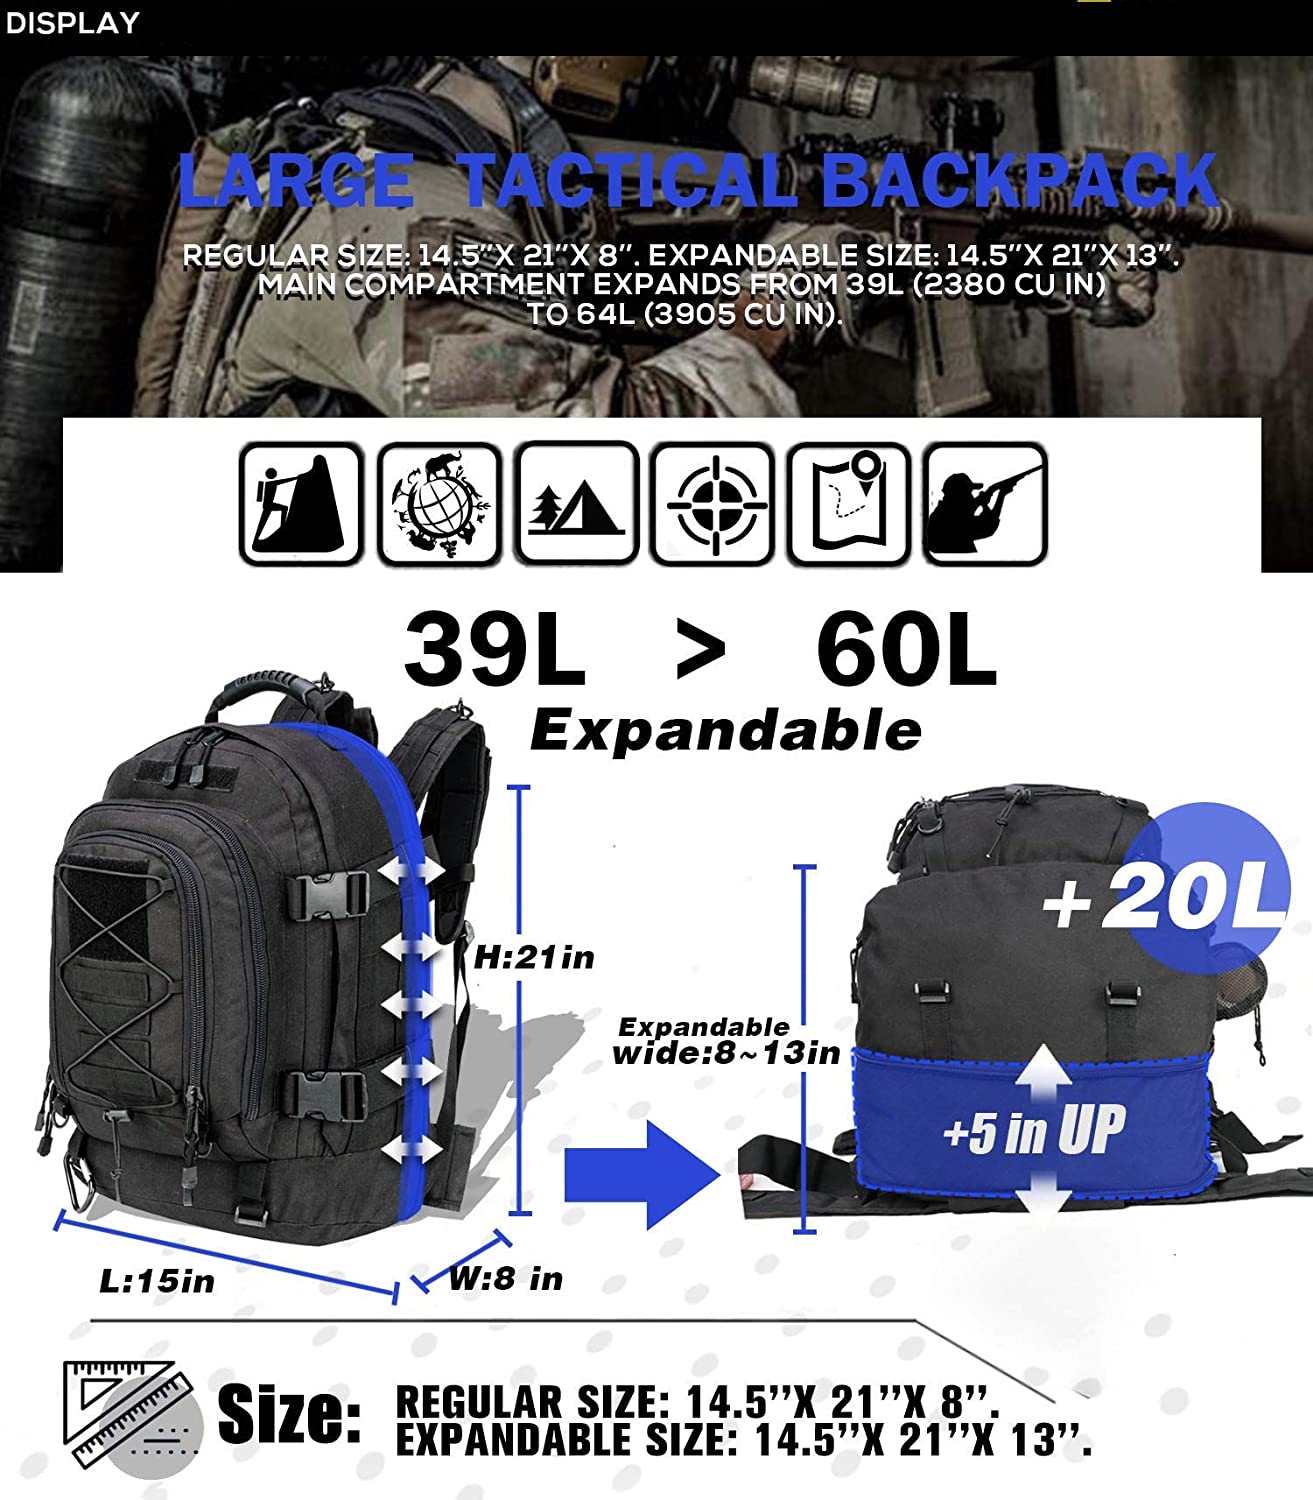 Tactical Backpack for men Military Army Expandable 3 Day Pack